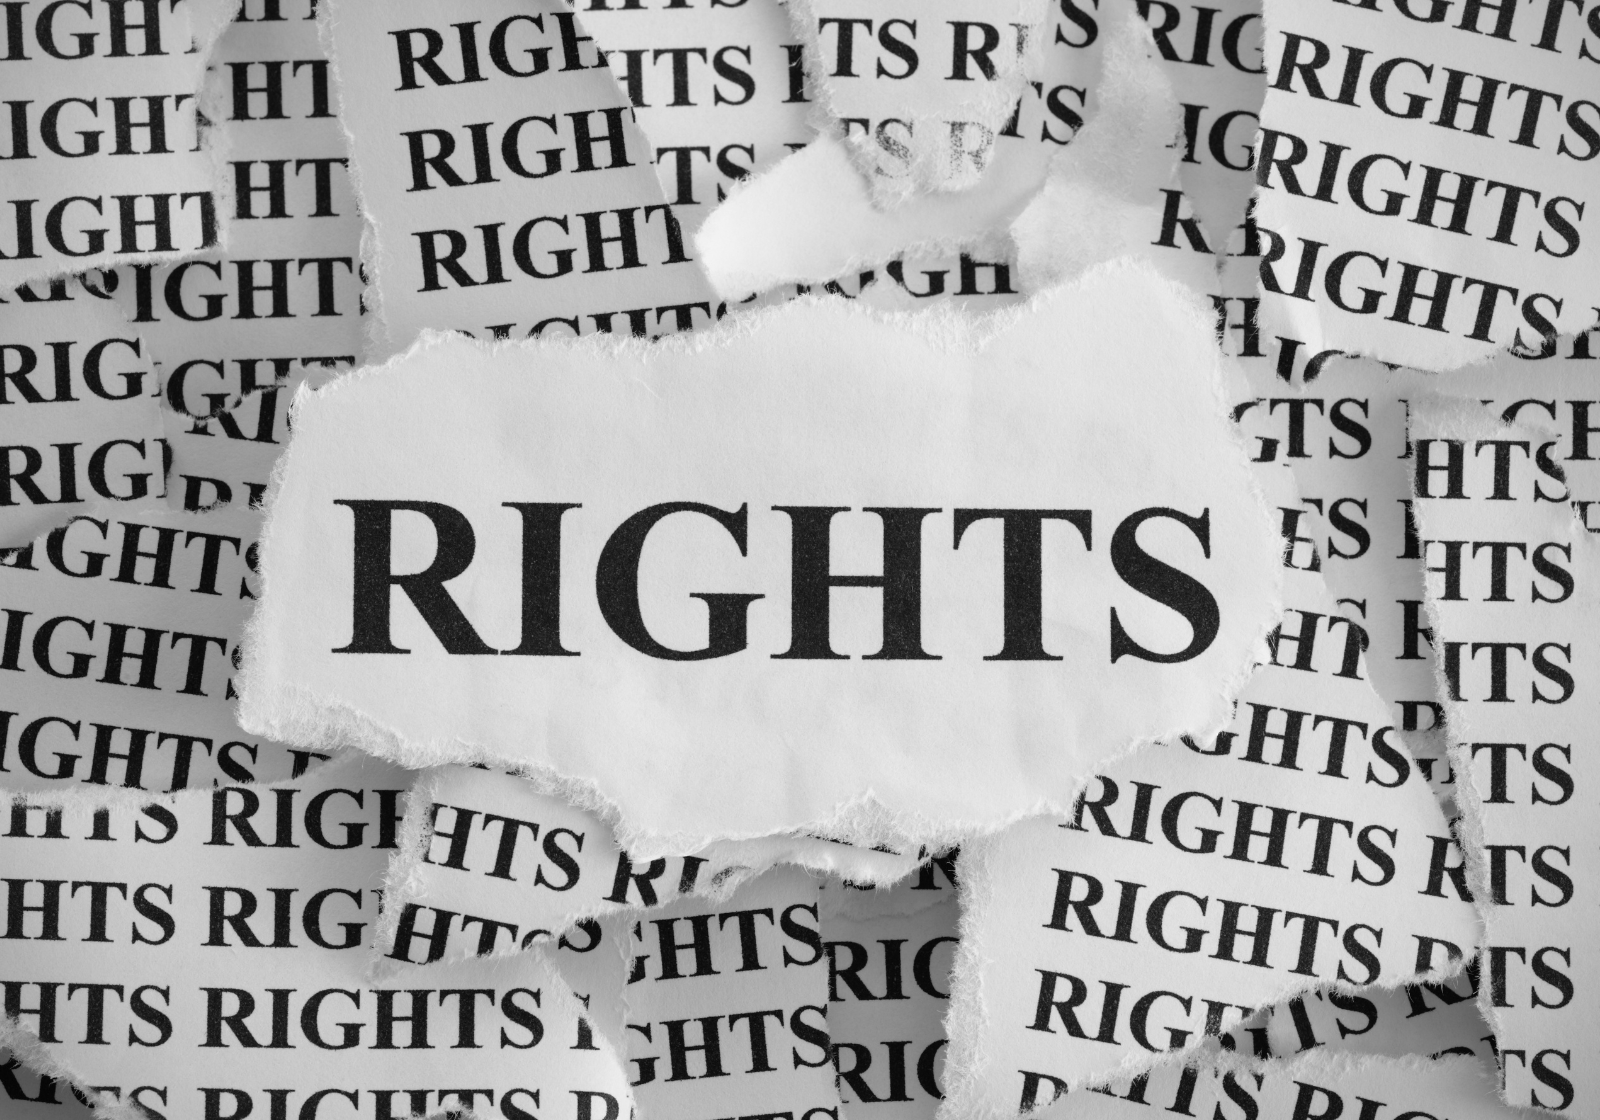 Graphic with the word "rights" written numerous times on ripped paper